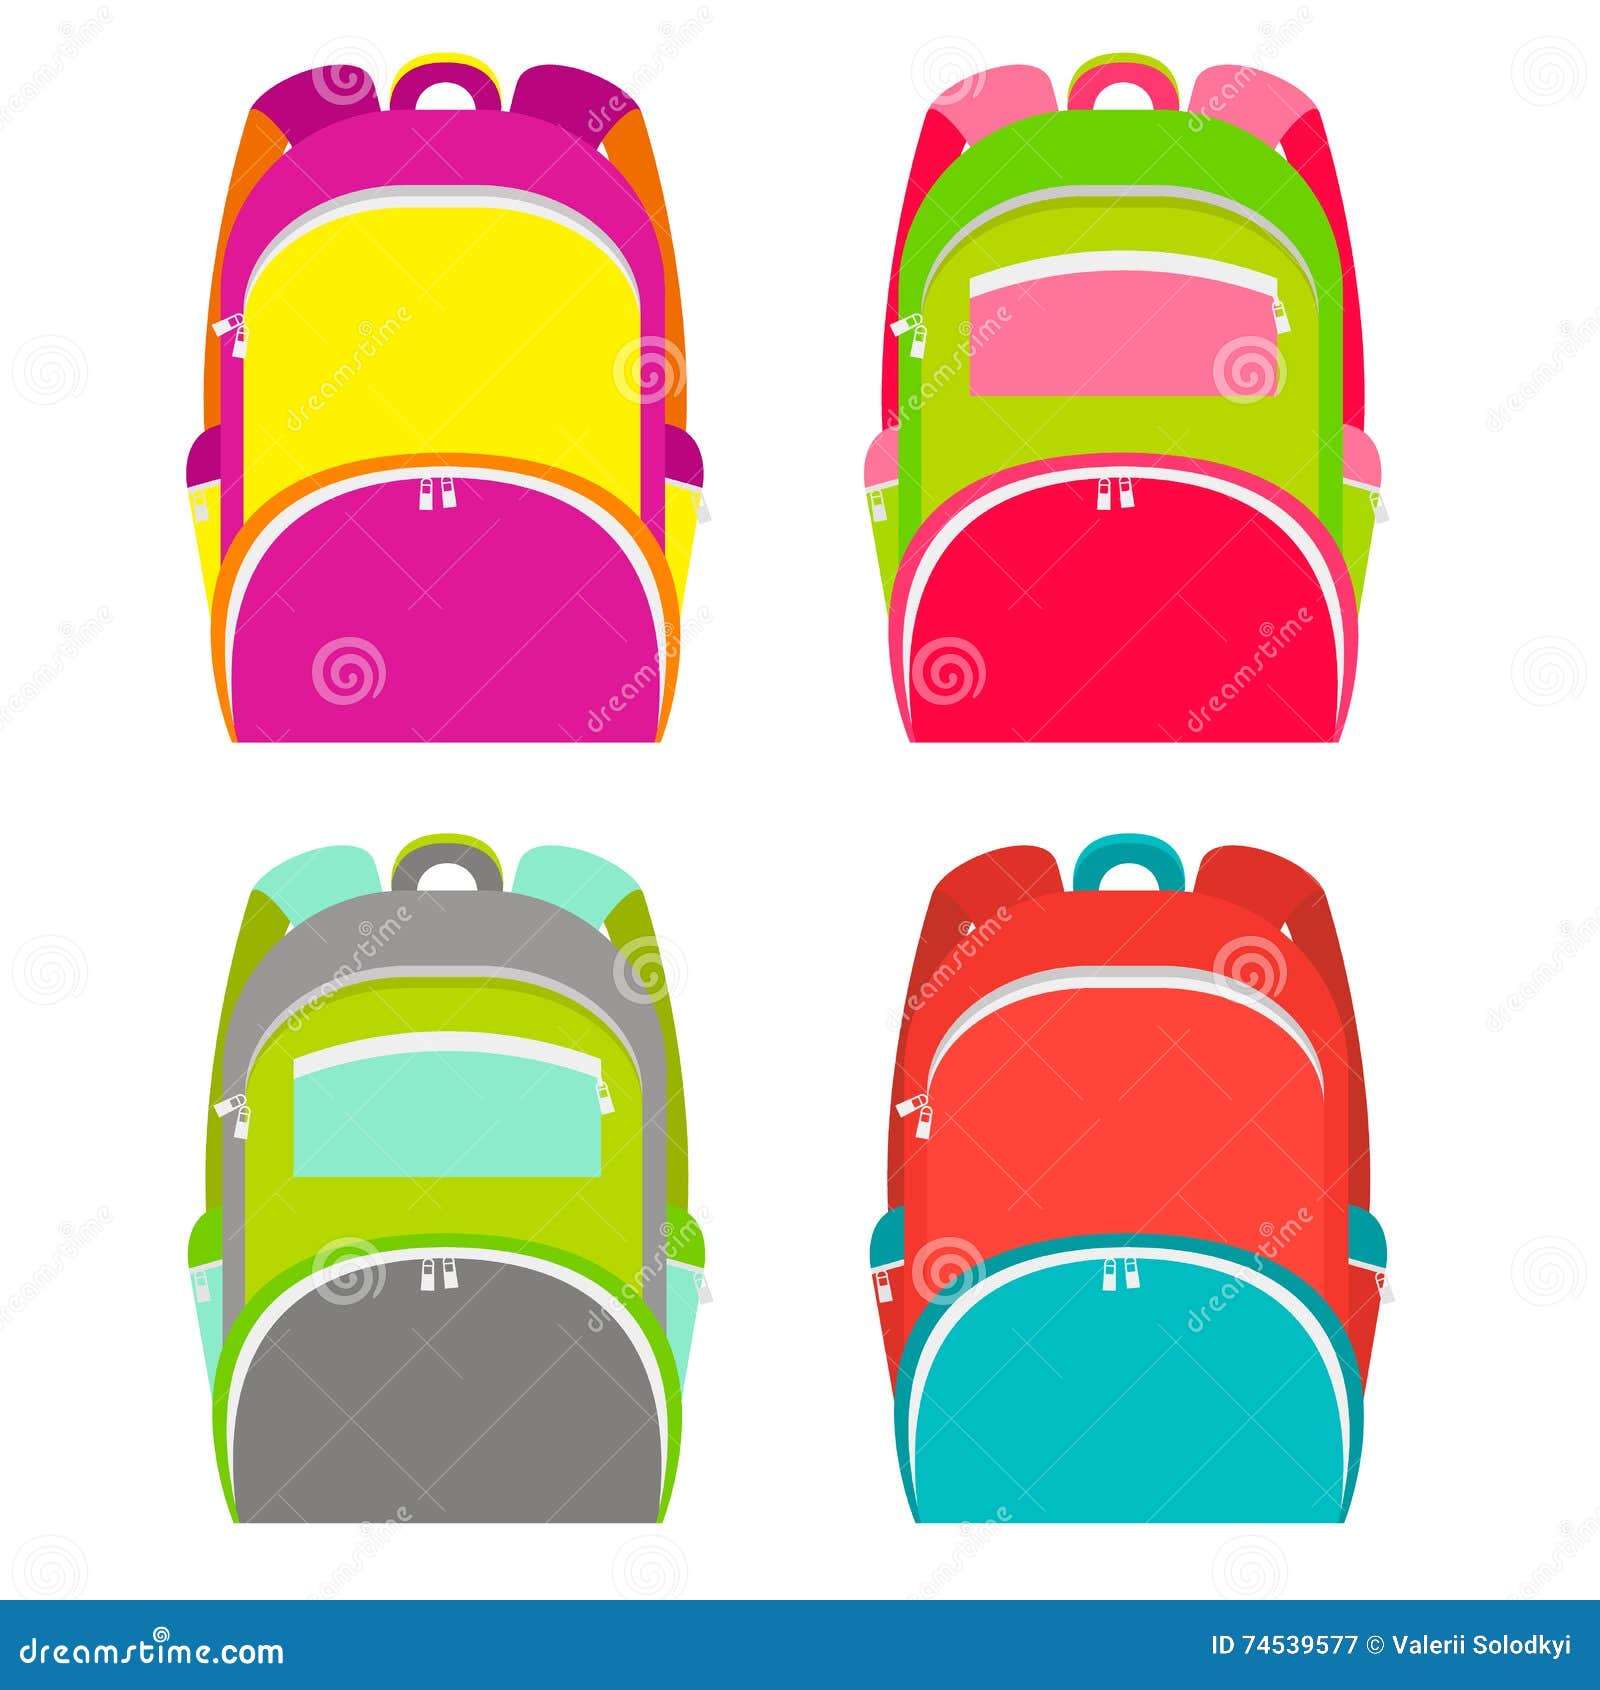 school backpacks collection  on white. school backpack in 4 different versions.  .